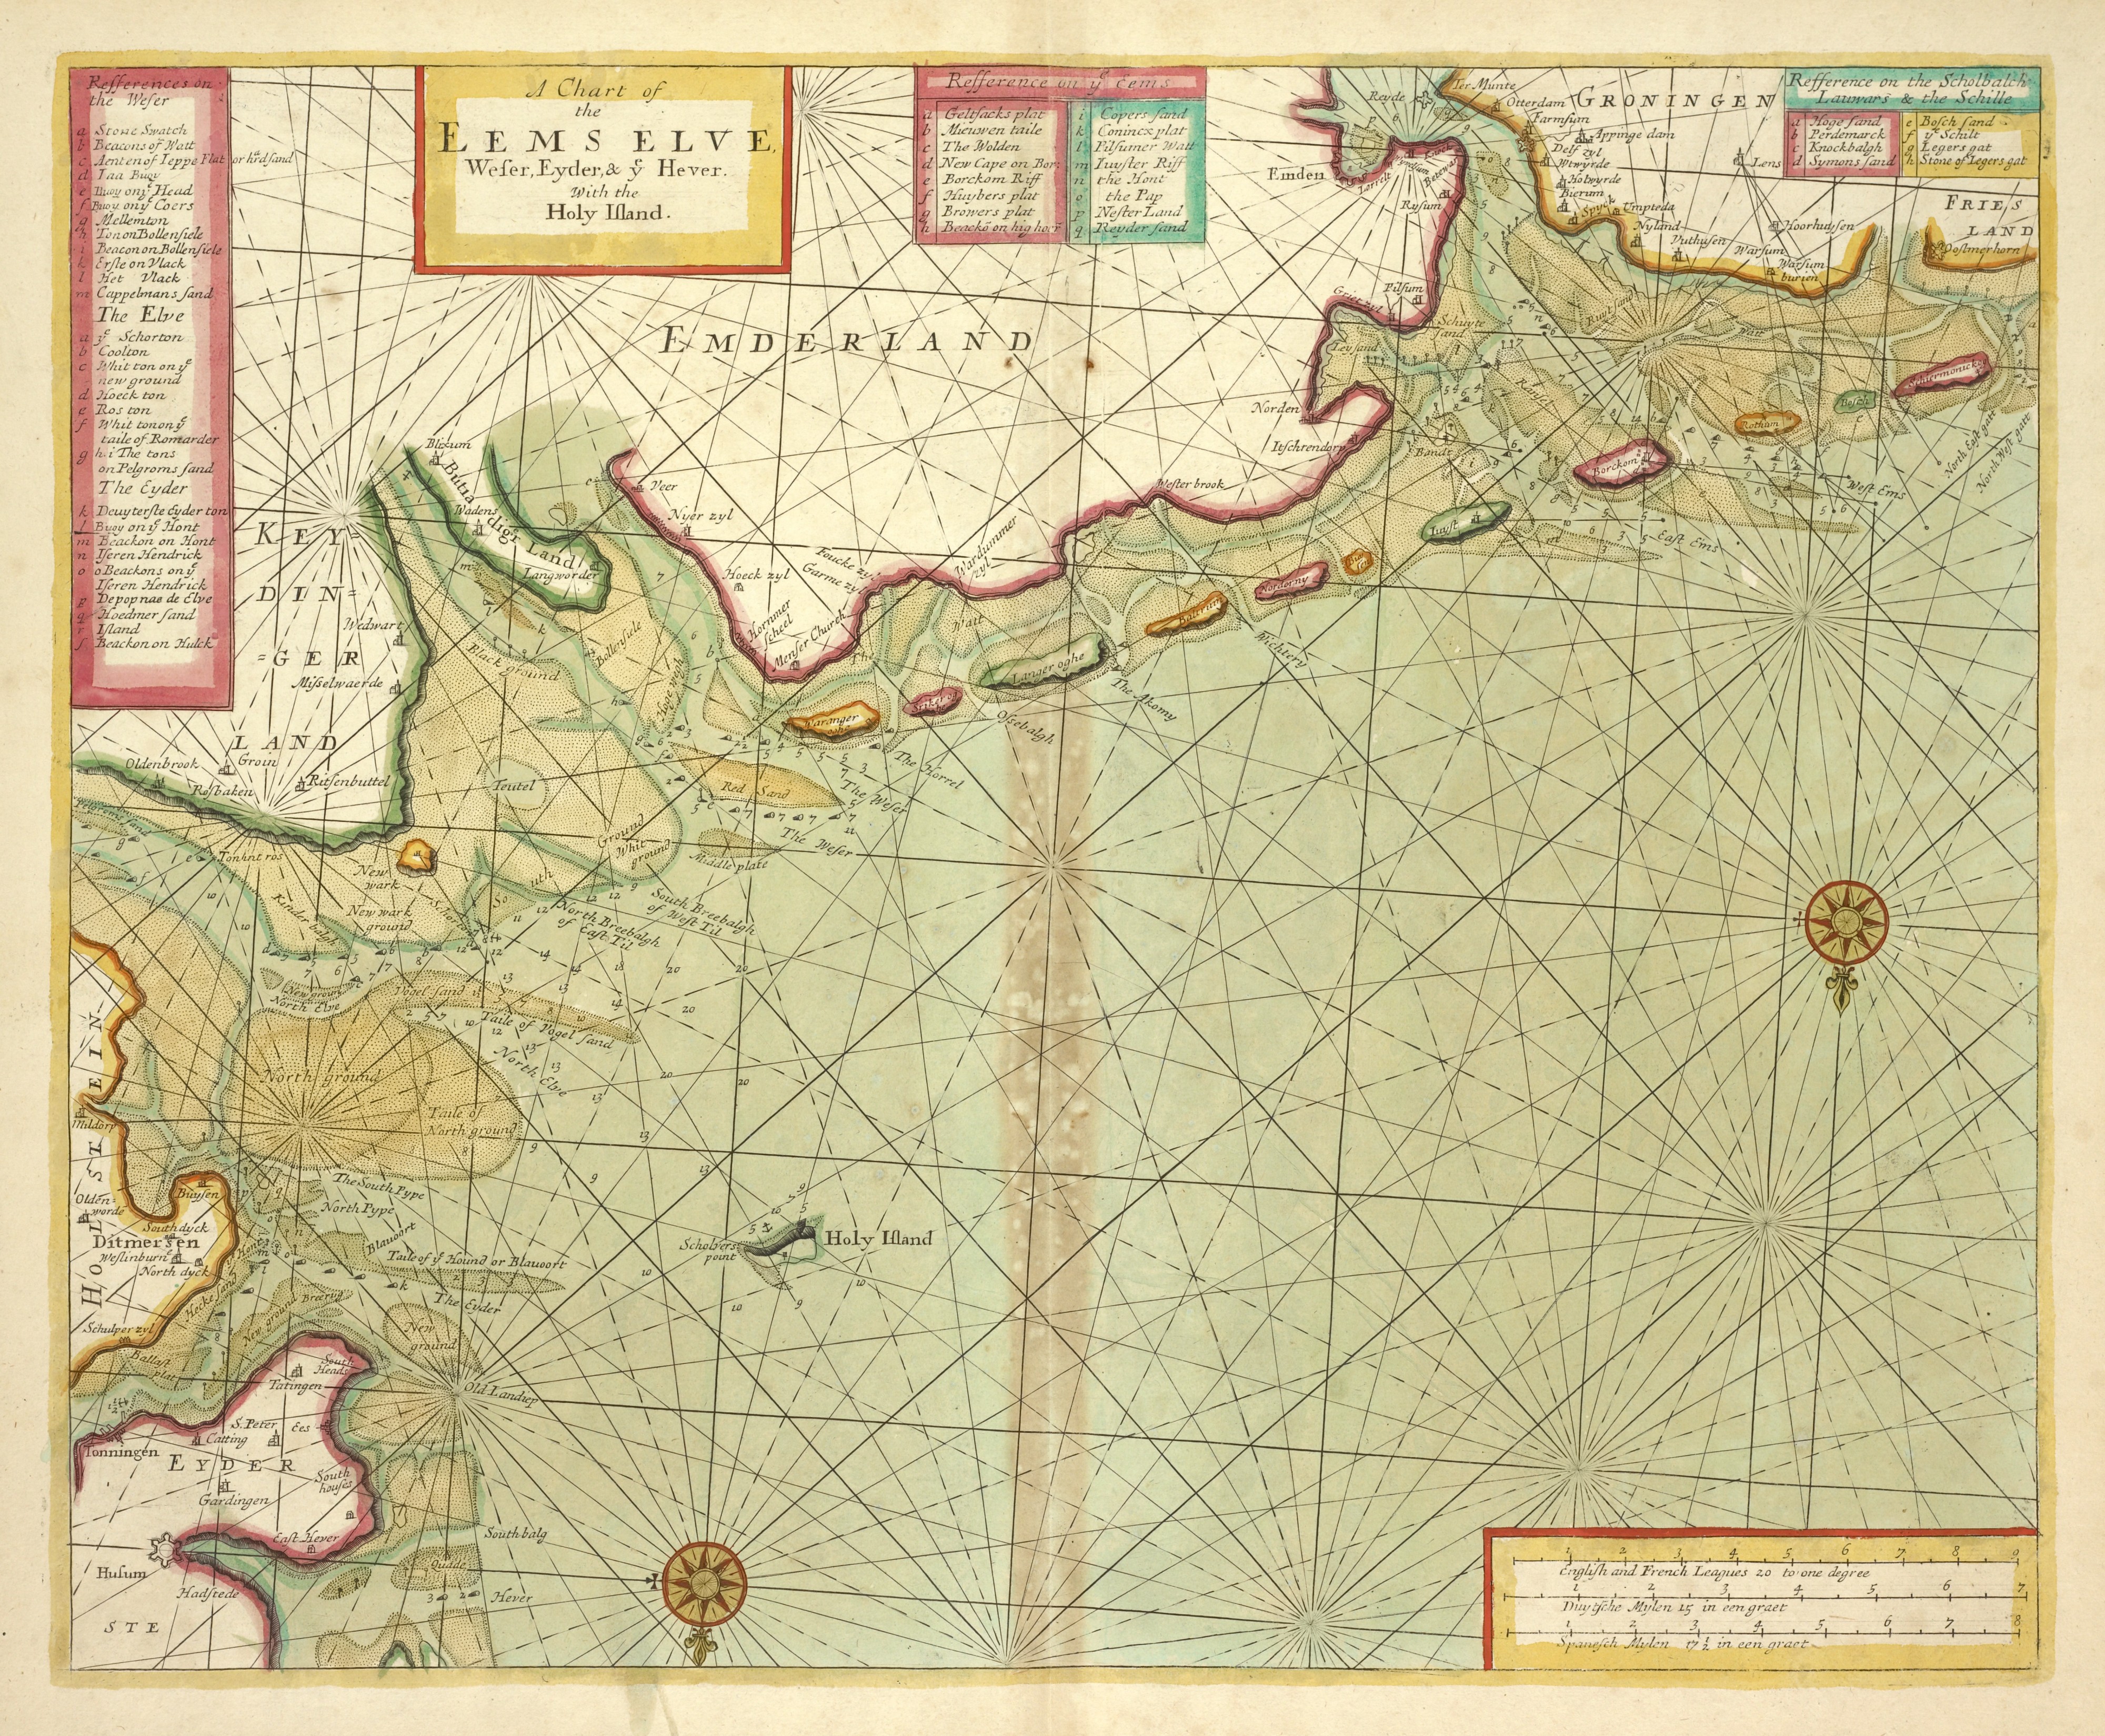 A chart of EEMS ELVE, Wefer, Eyder and Hever. With the Holy Island (NYPL b13909432-1640697)